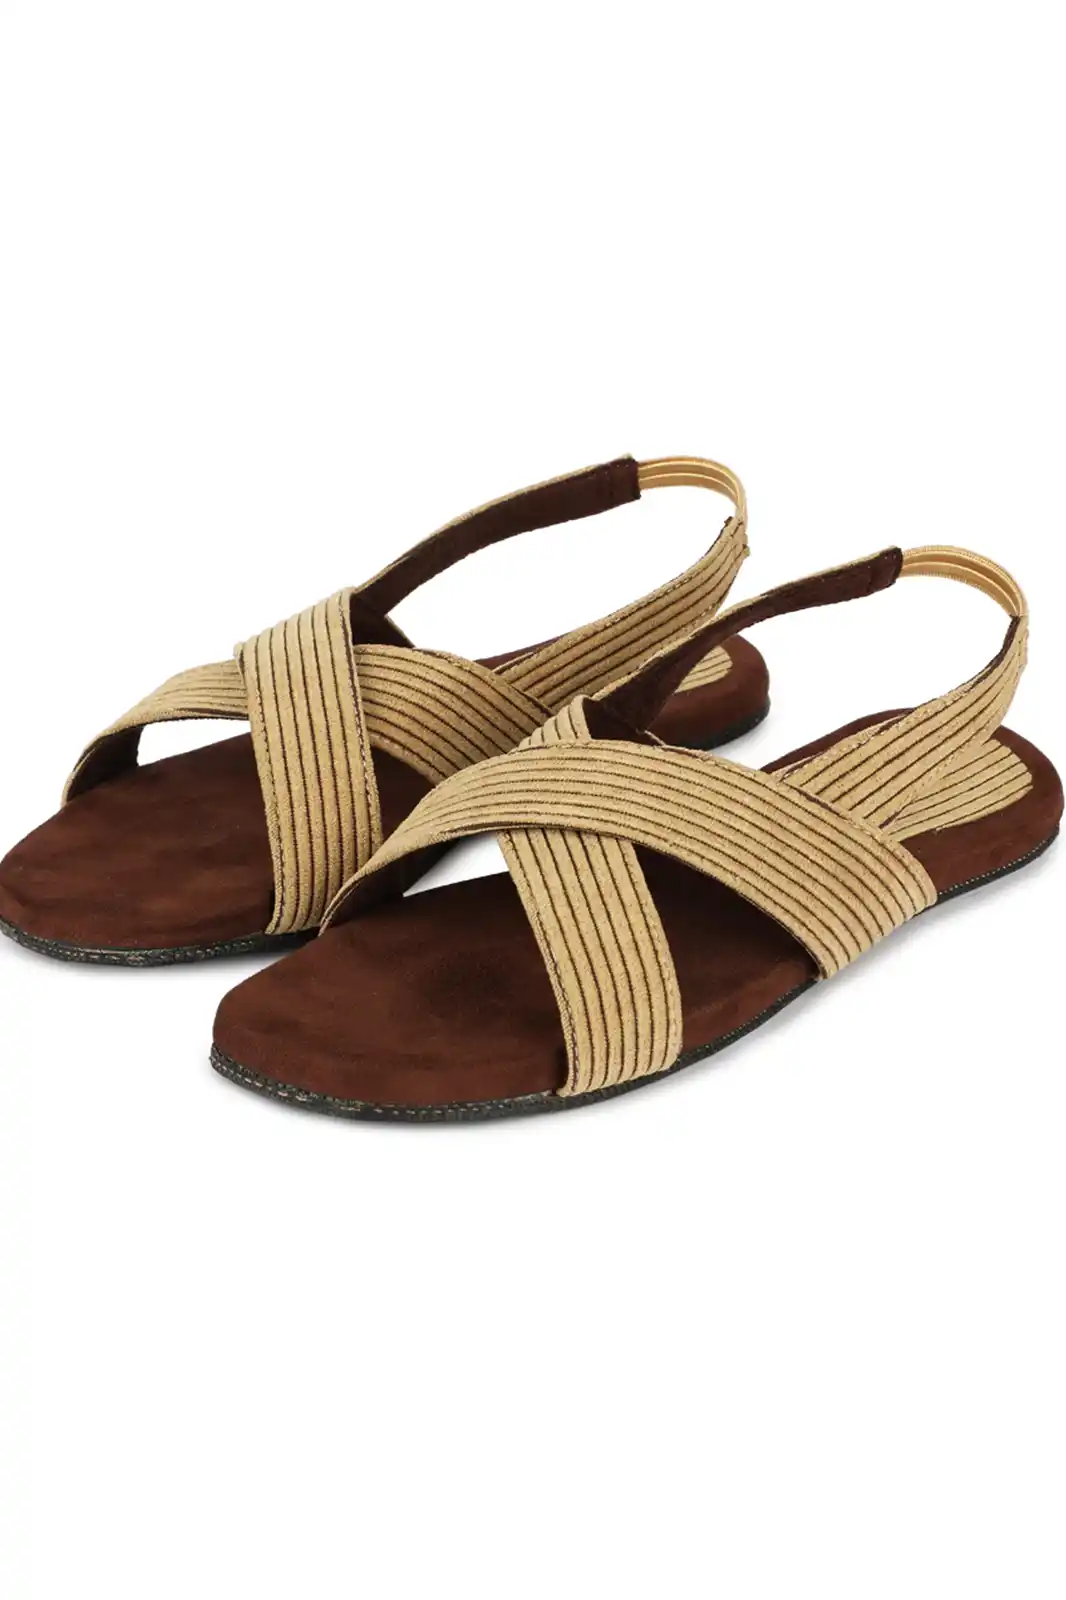 Discover more than 75 cross strap sandals womens best